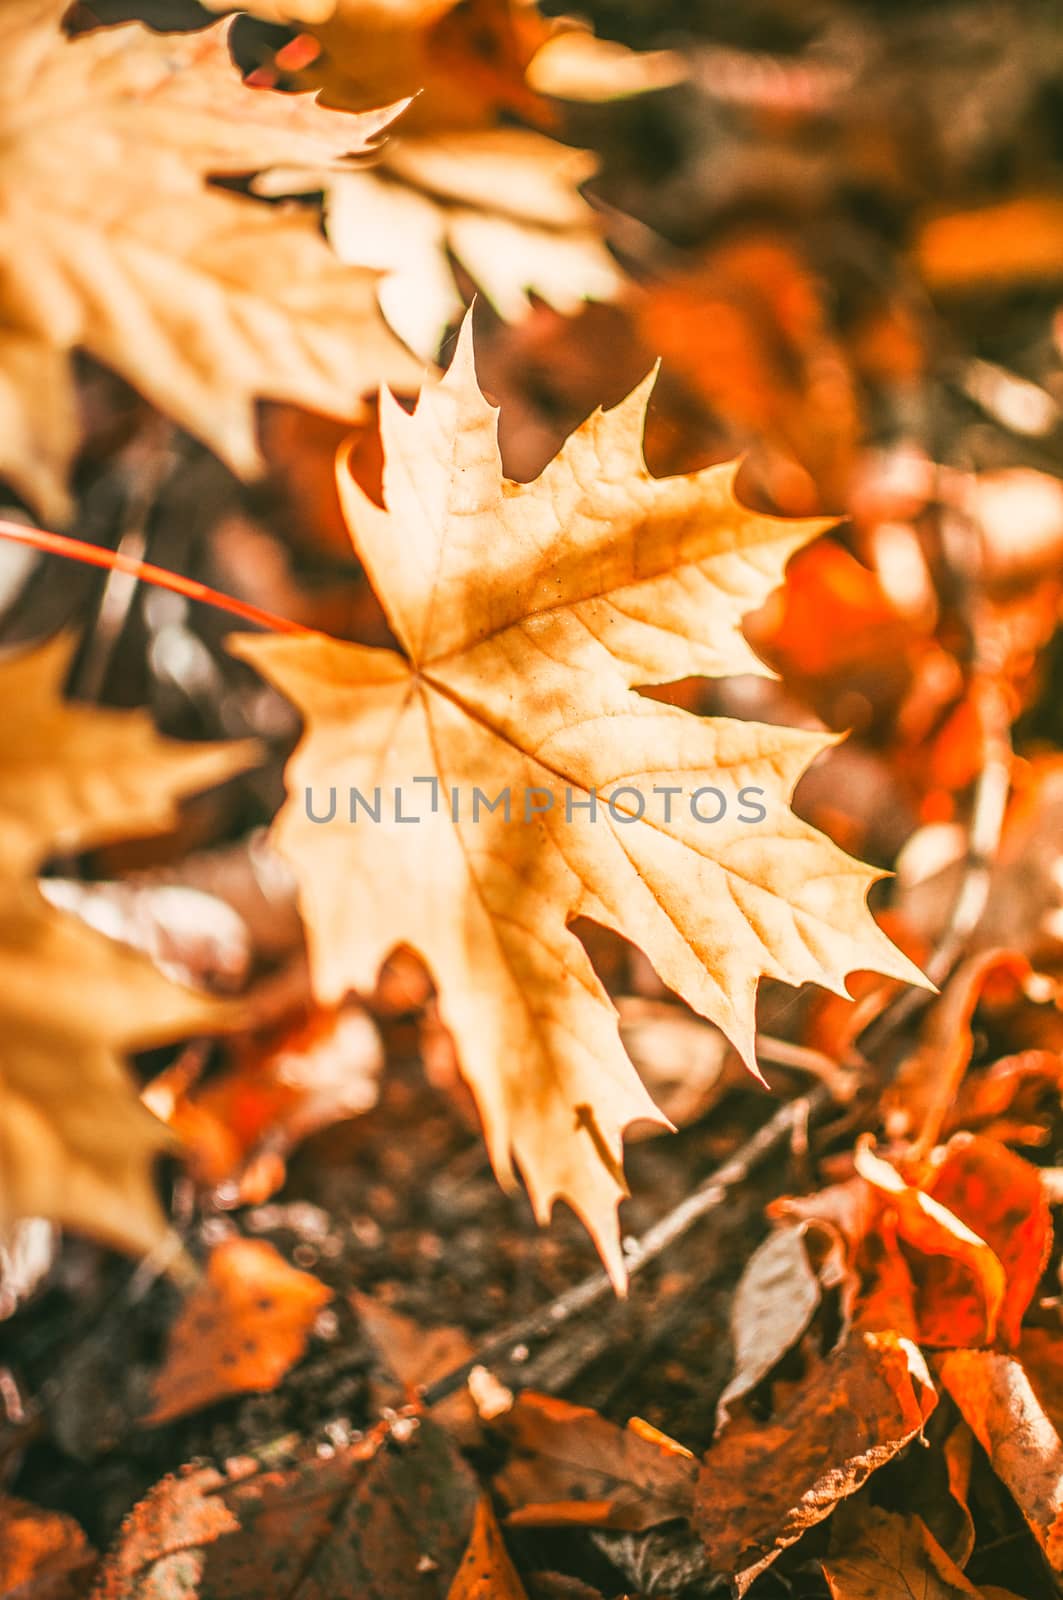 brightly colorful maple leaf close-up in the sunshine selective focus. Natural autumn background with place for copy space. Seasonal concept.